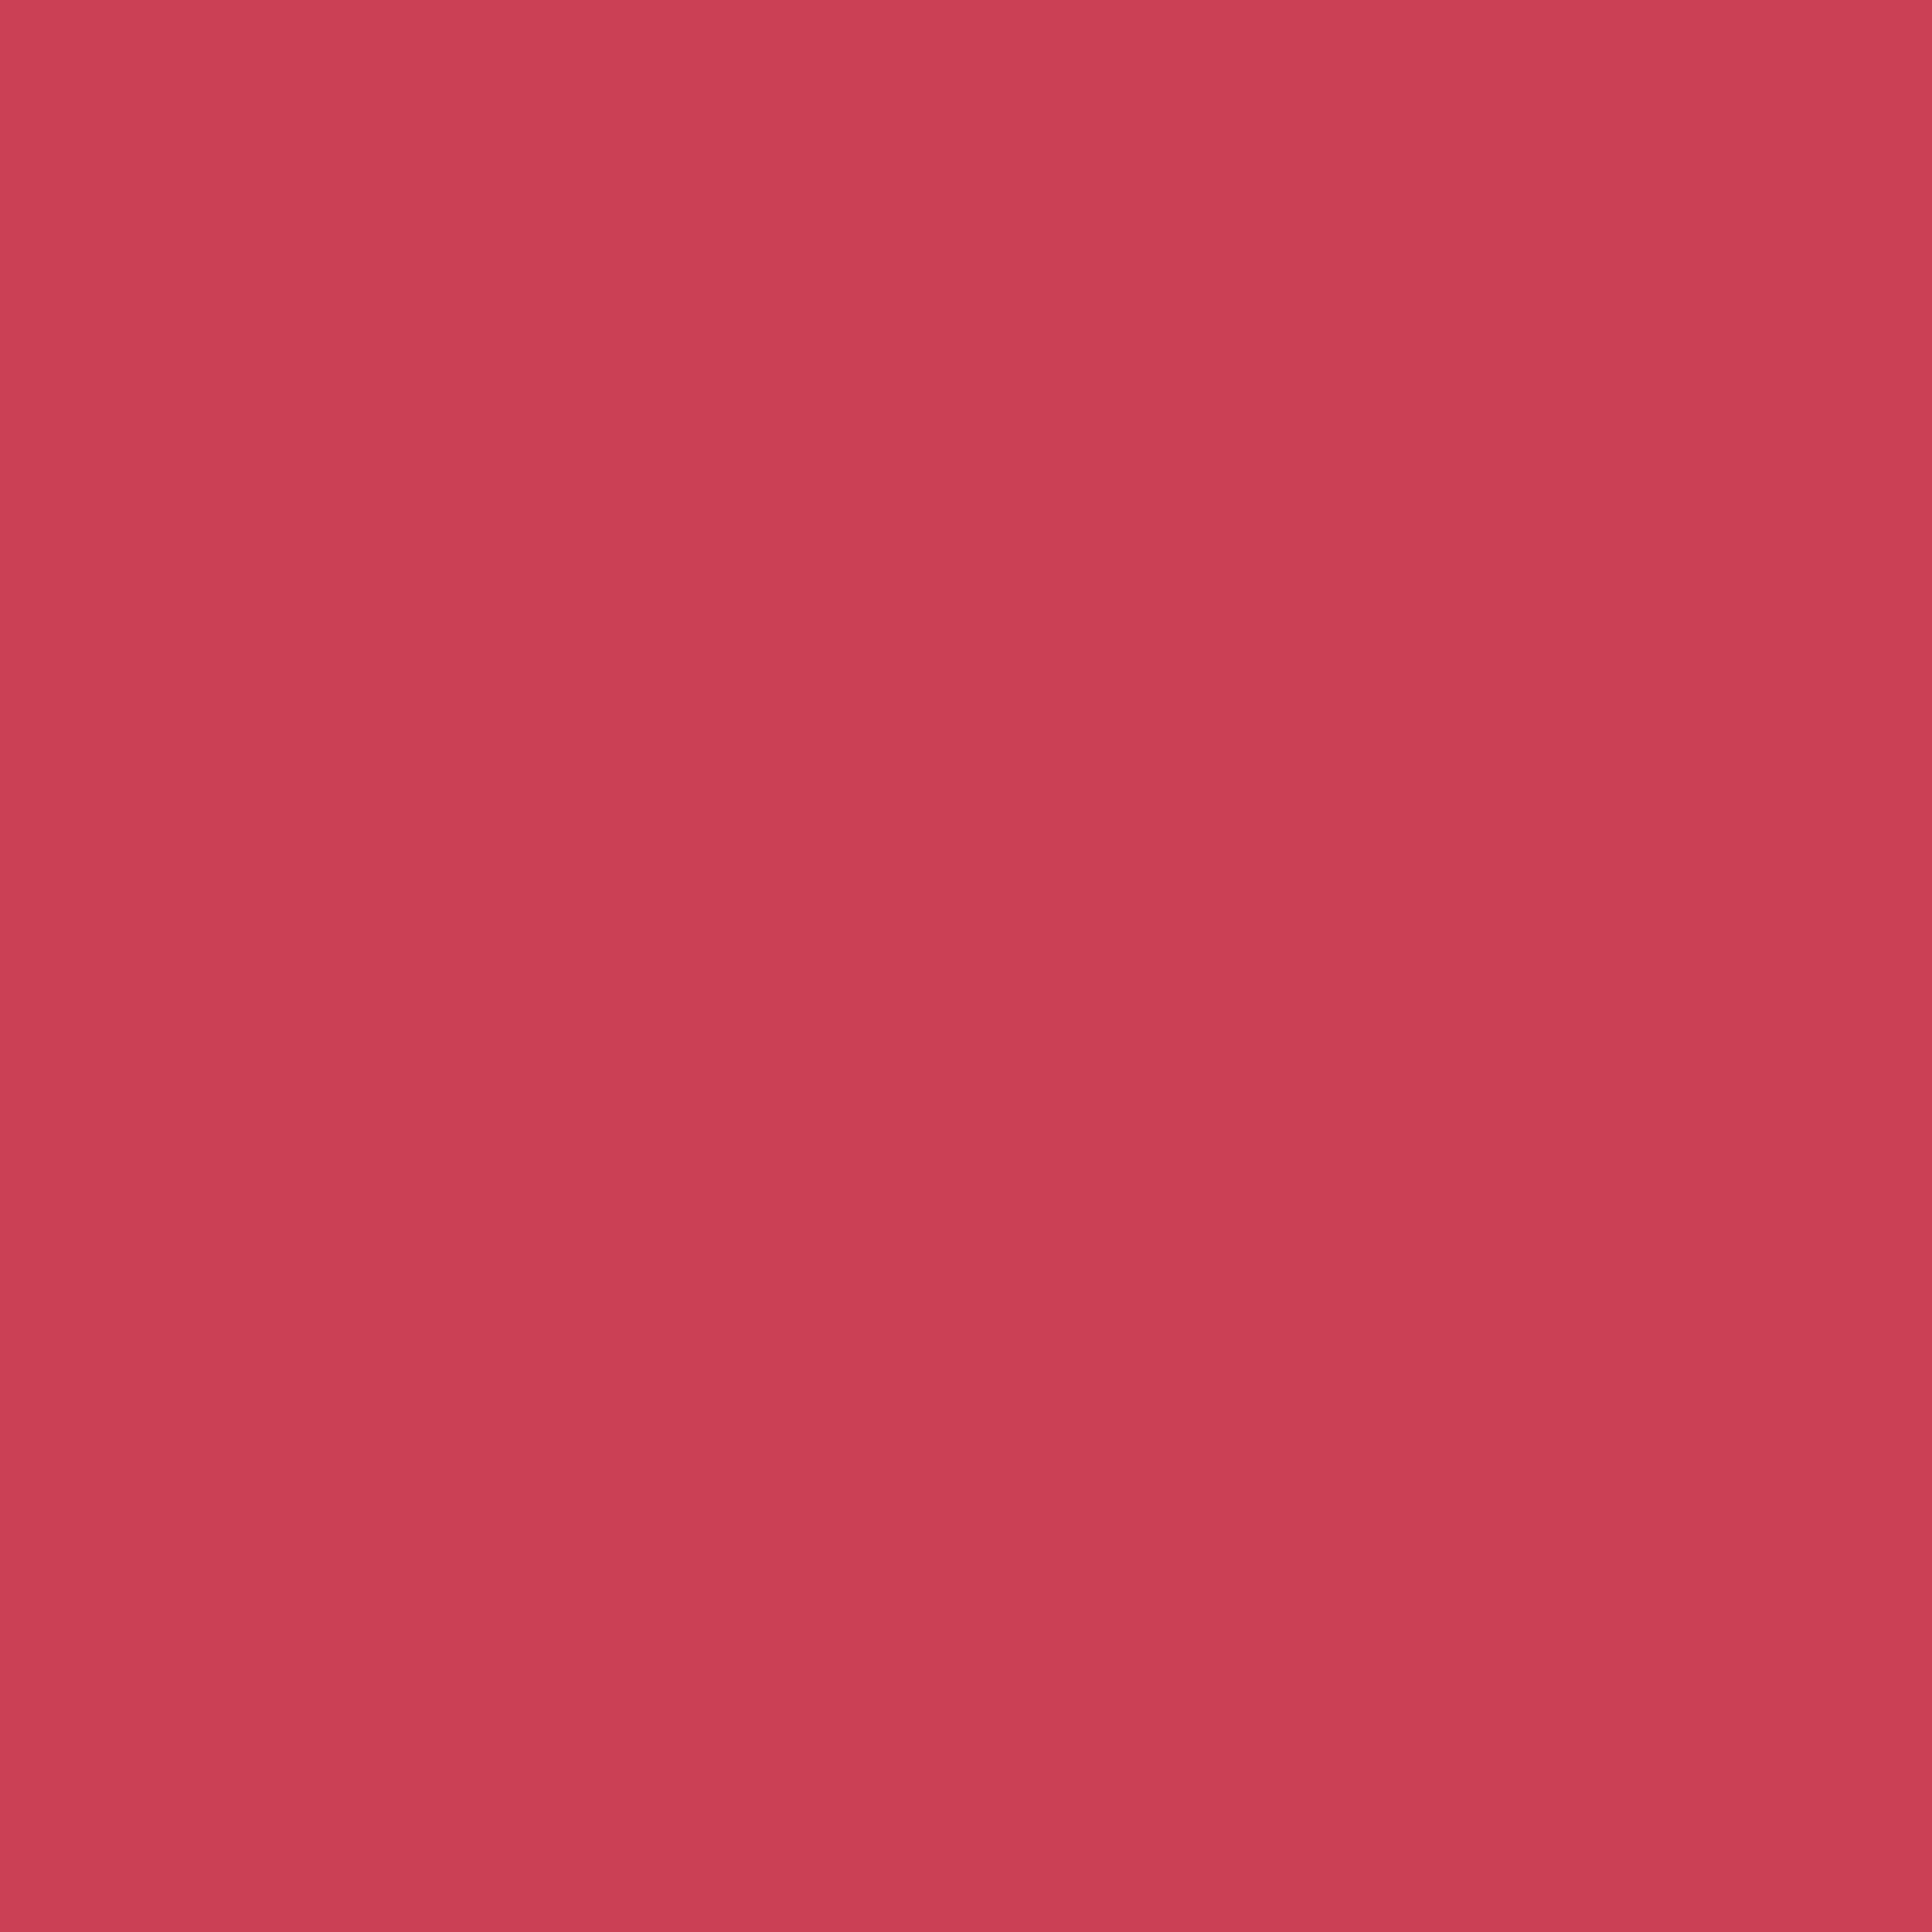 2732x2732 Brick Red Solid Color Background